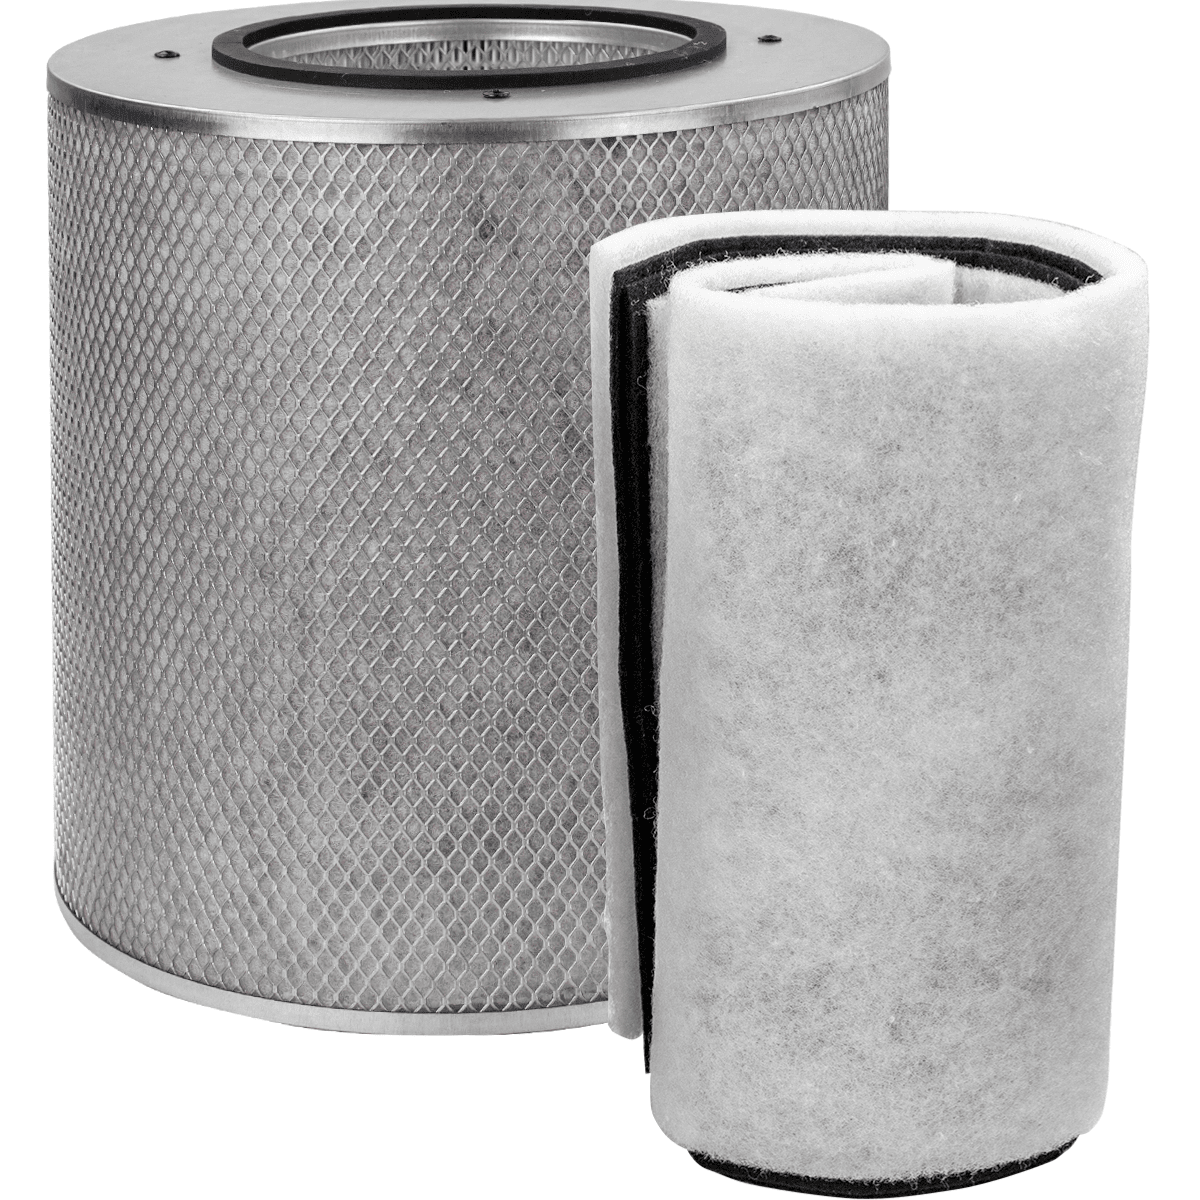 Filter-Monster Replacement Filter Compatible With Austin Air Healthmate (FR400)